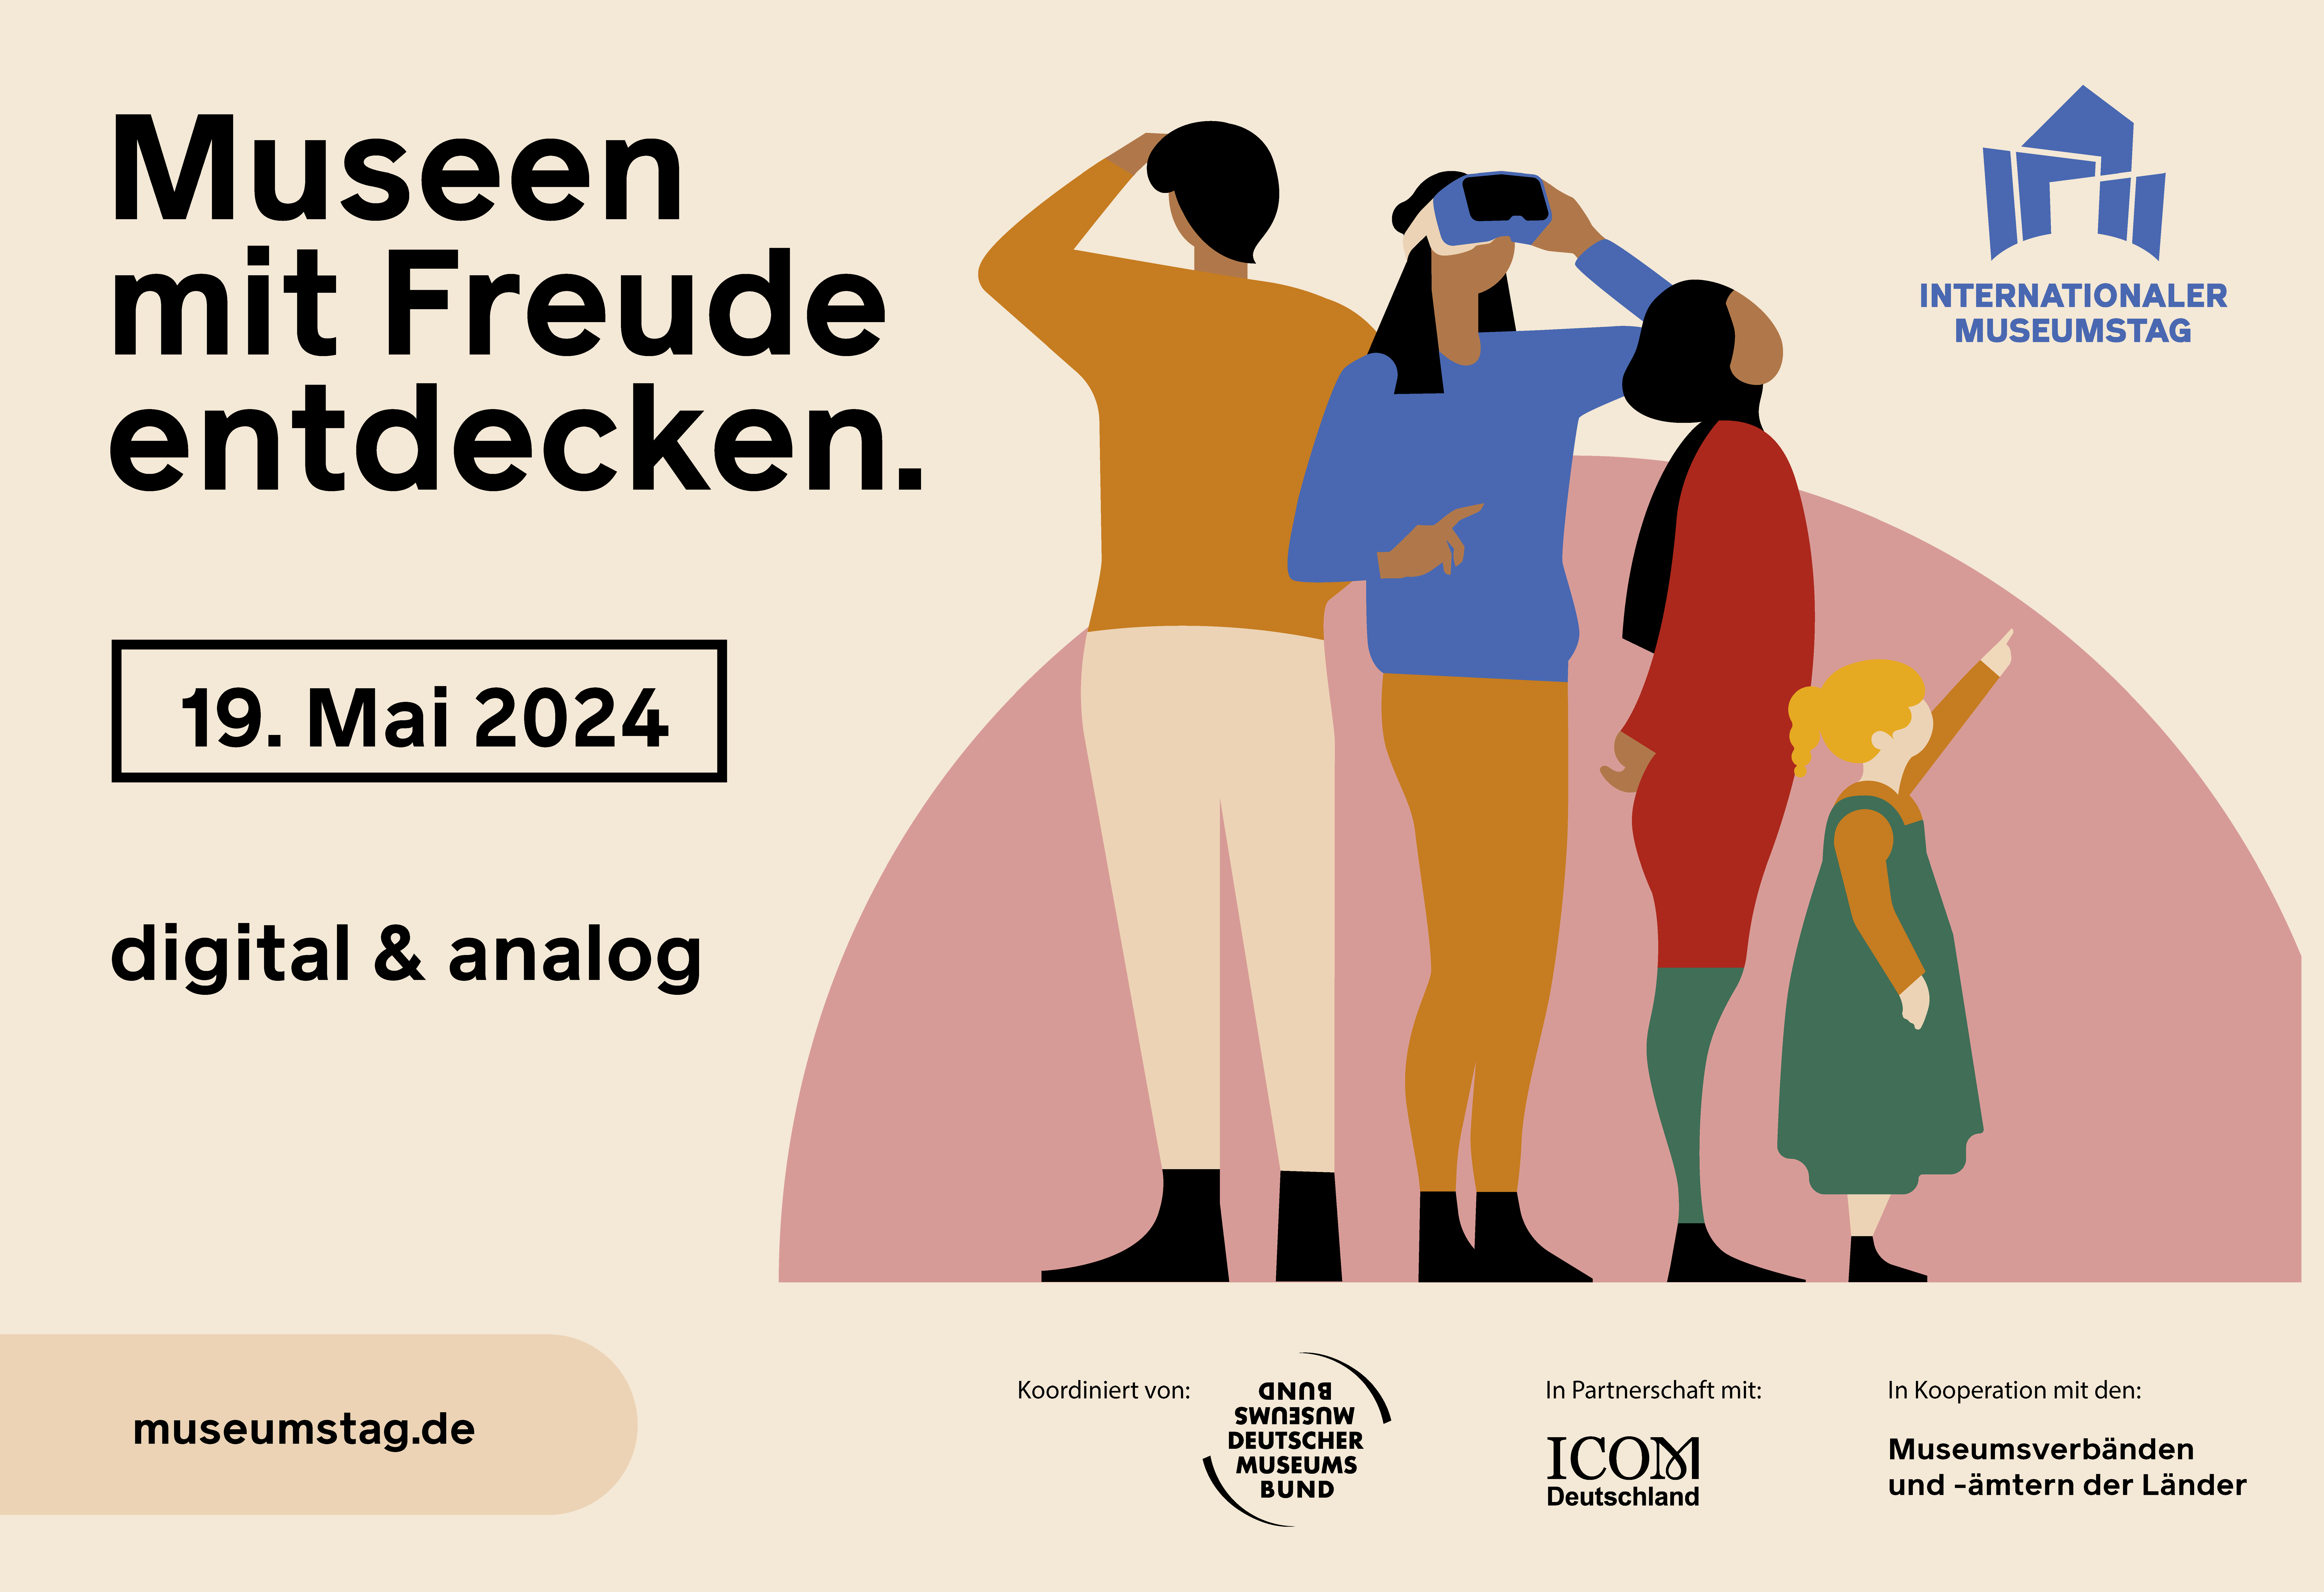  Museumstag 2024 